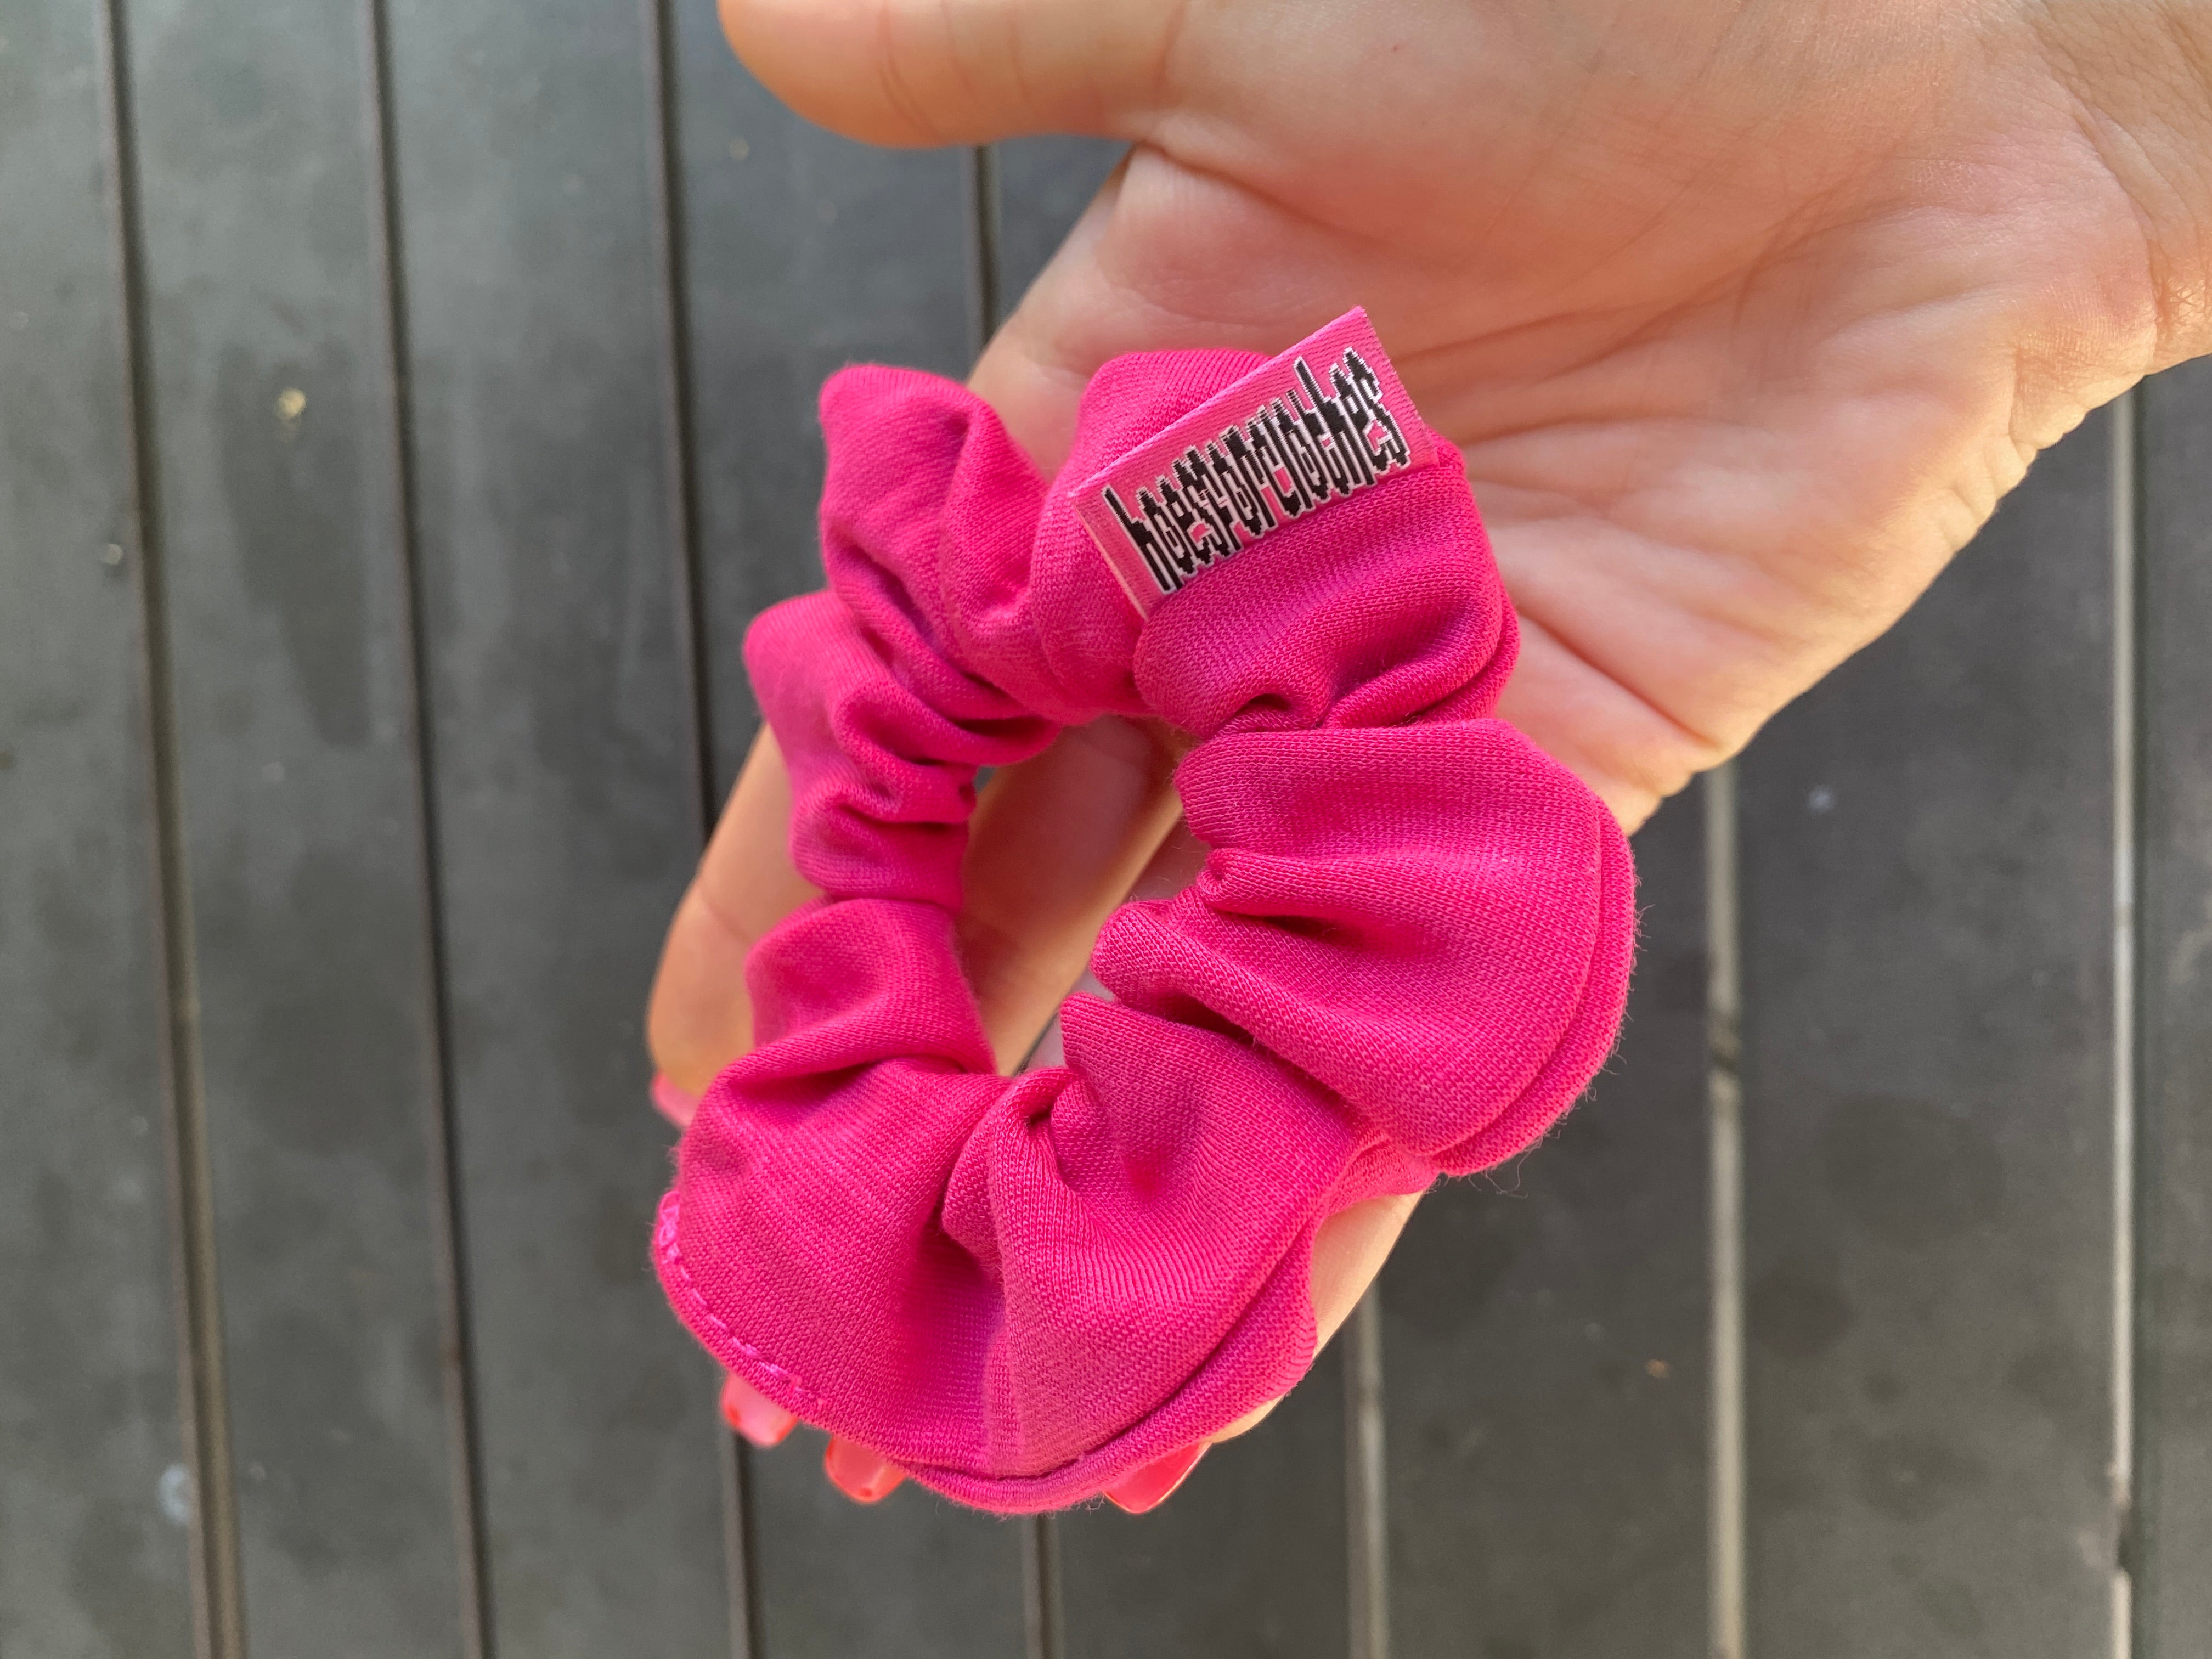 H4C recycled fabric scrunchie